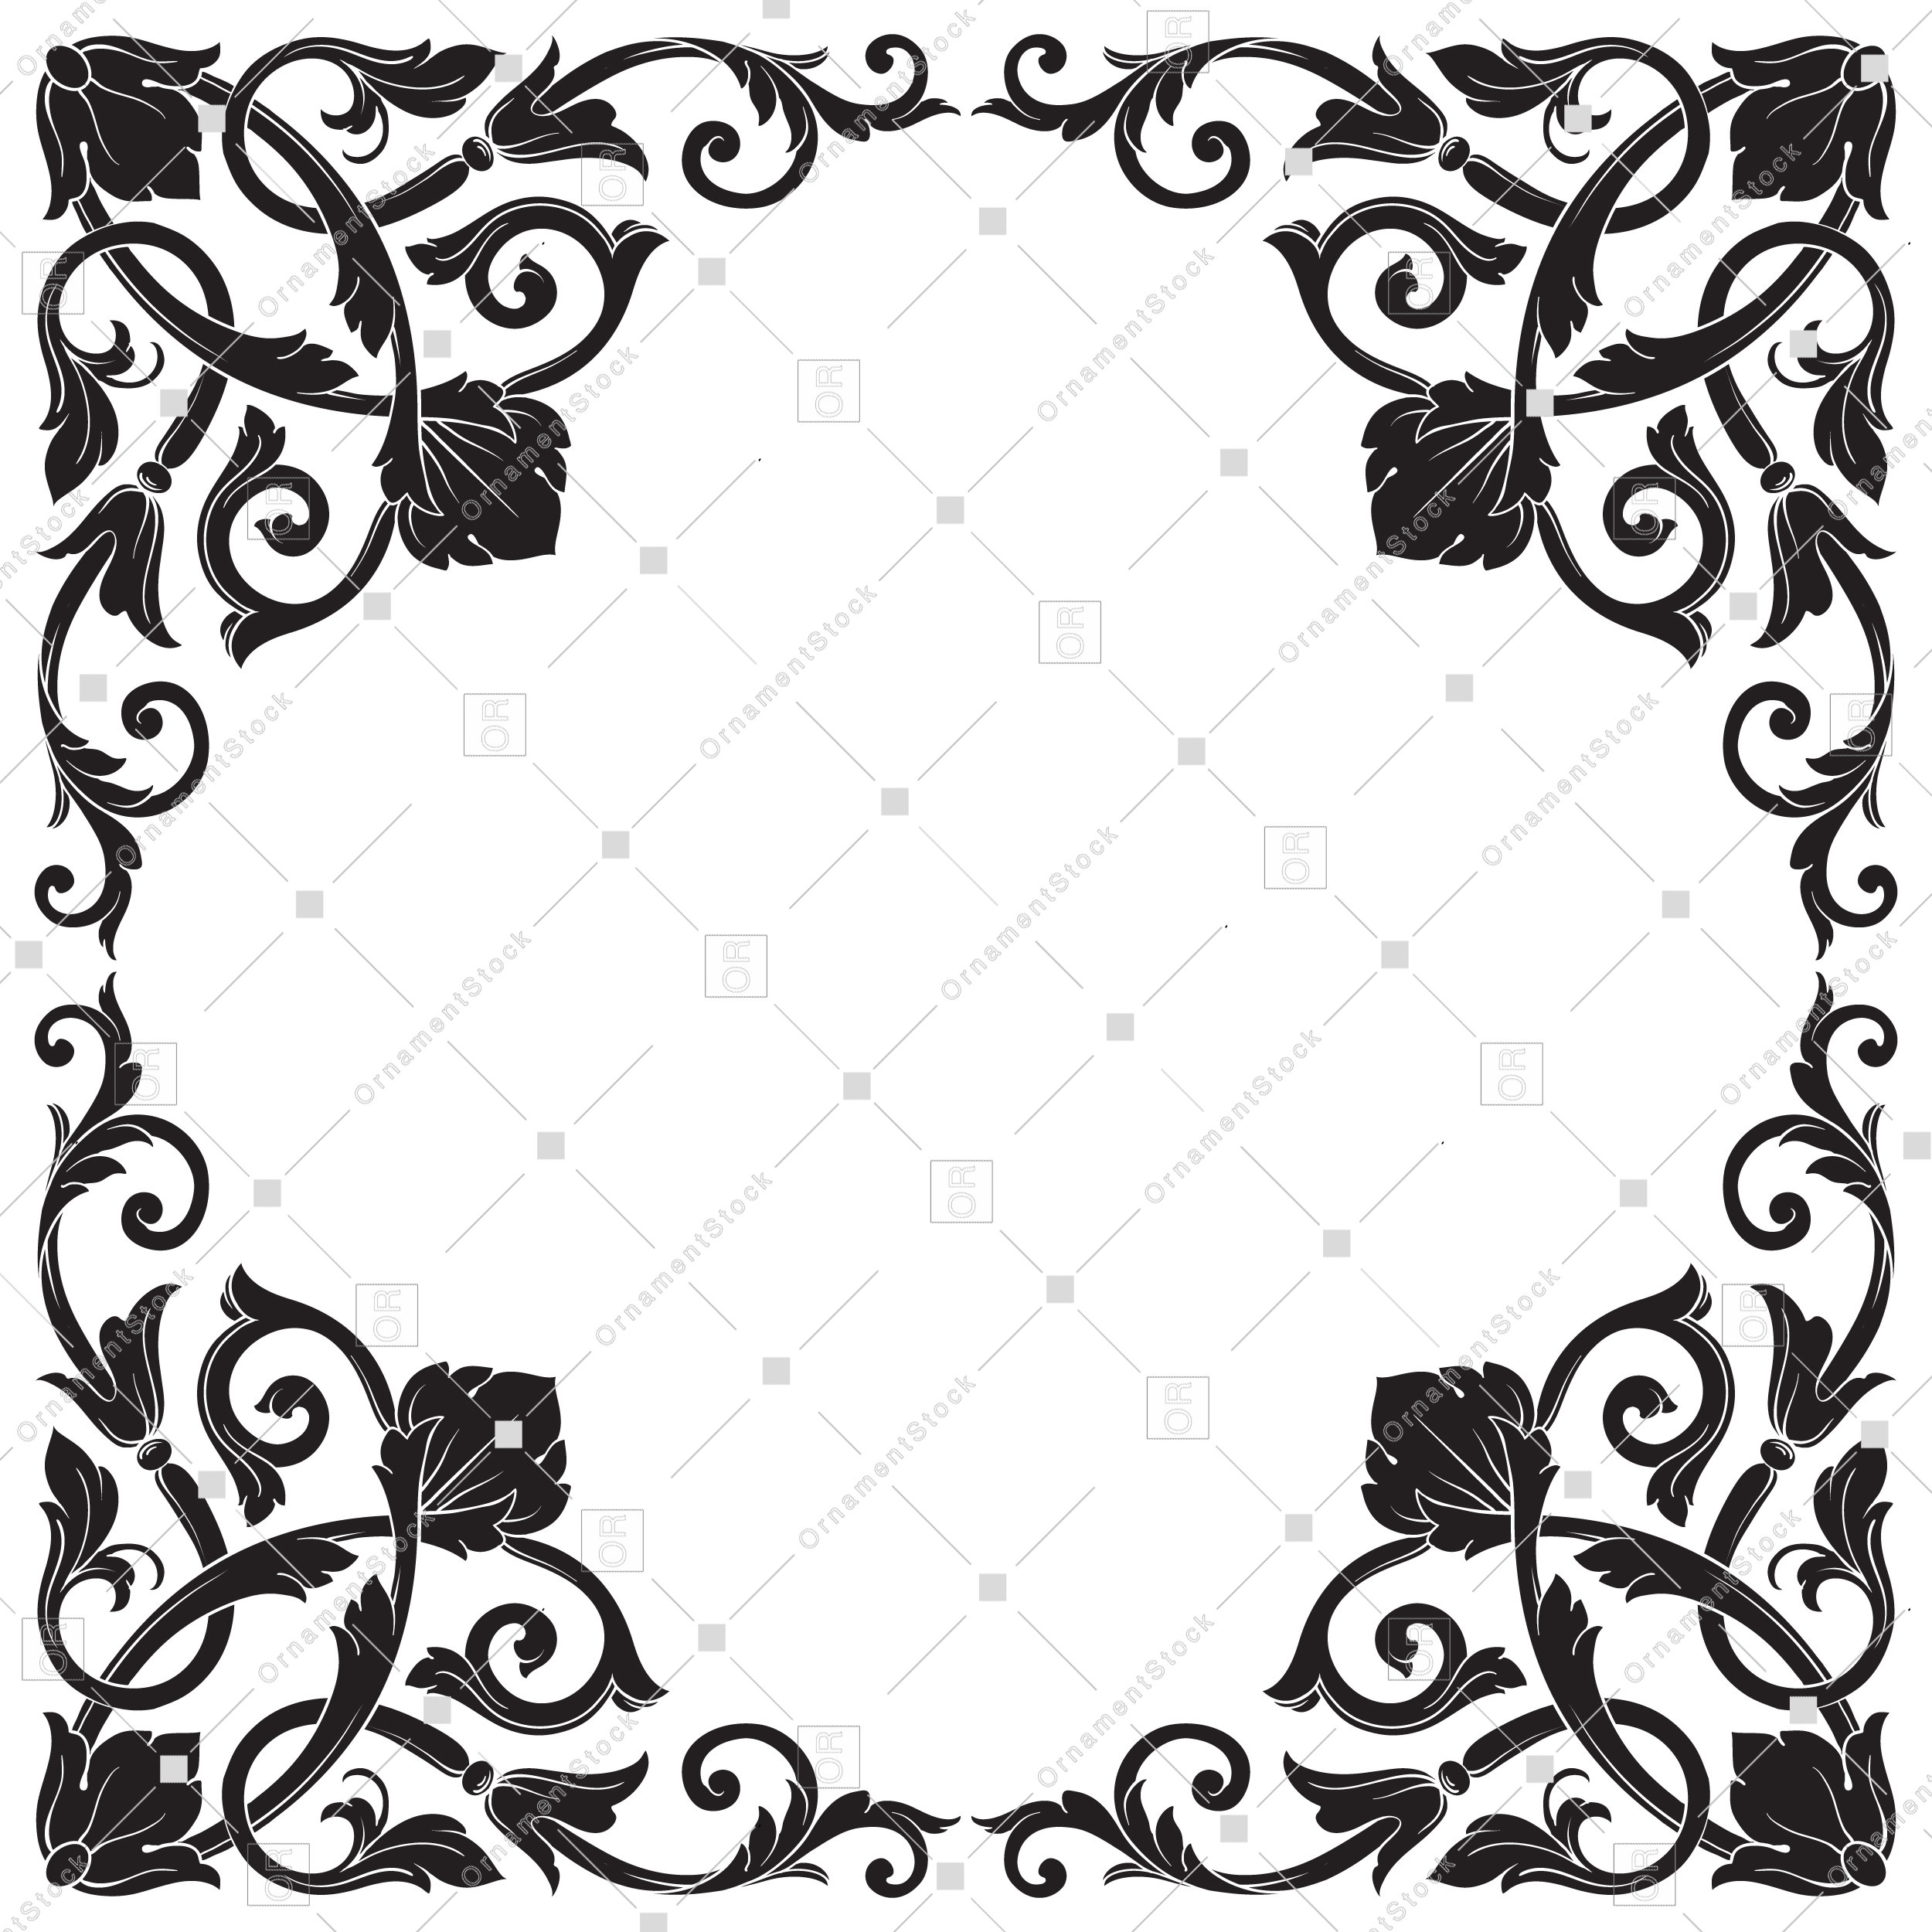 Frame Landscape Designs For Paintings And Photographs Royalty Free SVG,  Cliparts, Vectors, and Stock Illustration. Image 61467898.